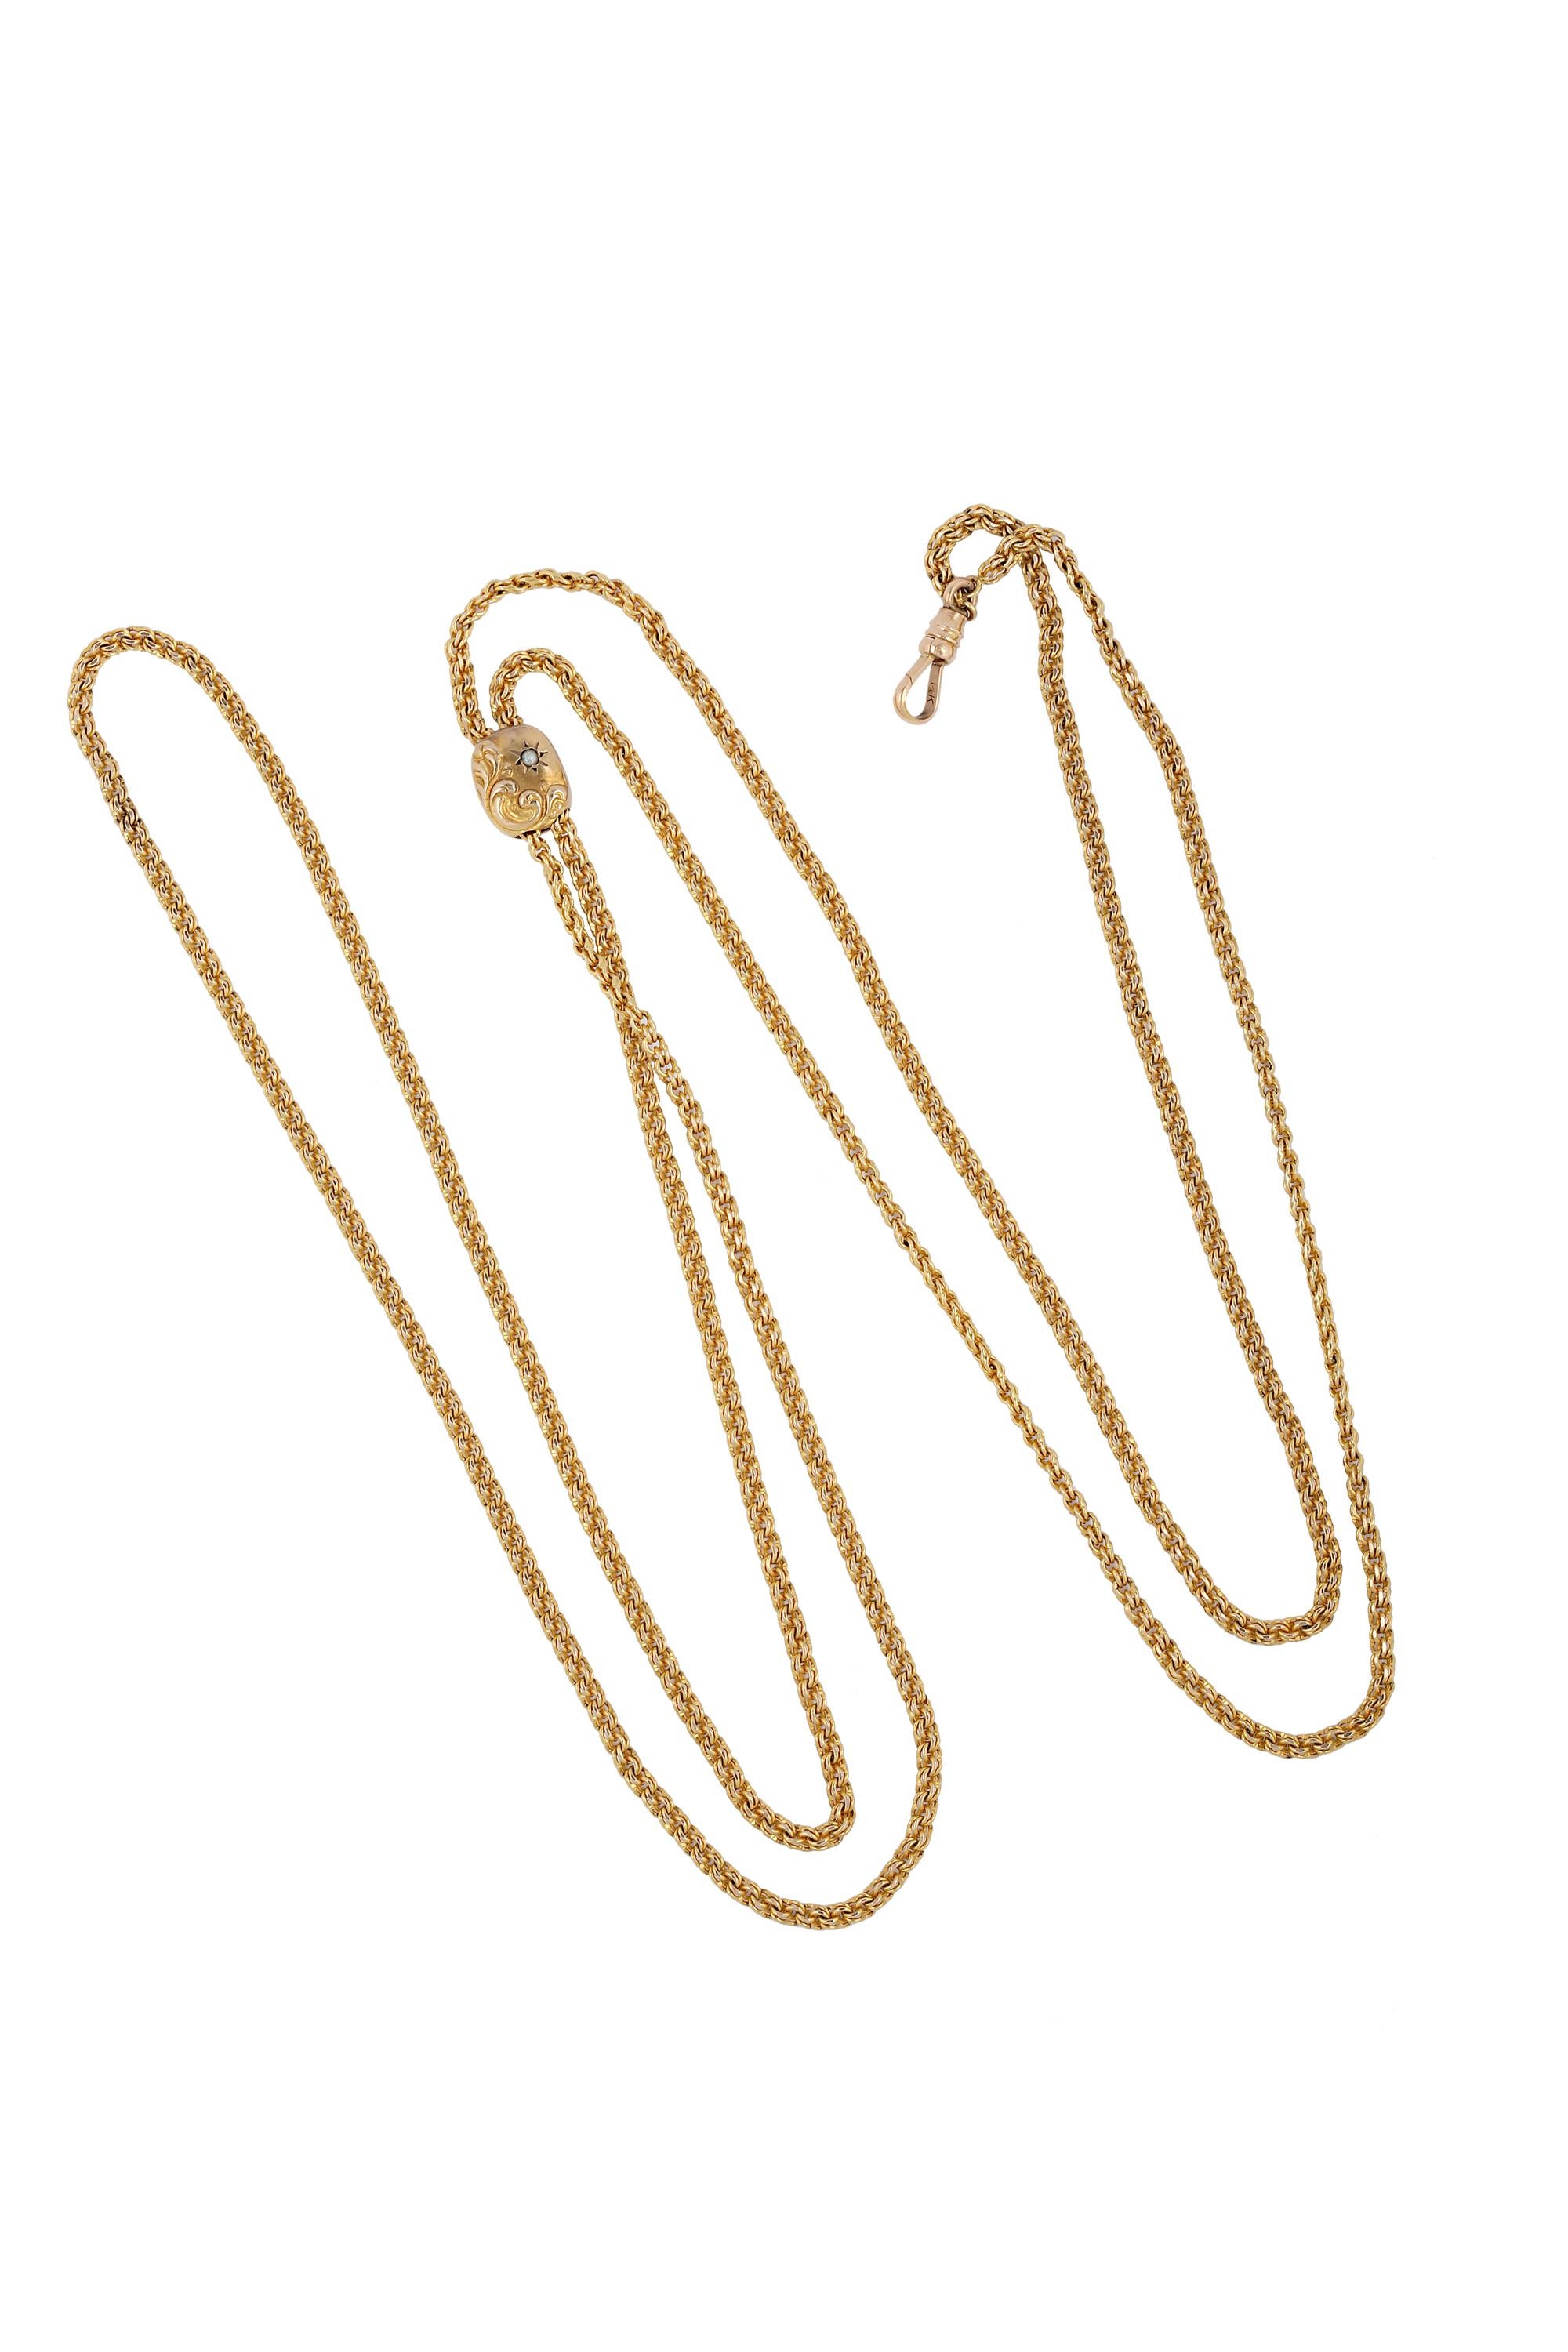 This fine 19th Century antique 14K yellow gold necklace includes a 50-inch chain of double rolo links with a slide which can be located along the chain to create any length 'drop' you feel comfortable with. 
The slide is 12mm tall and moves smoothly